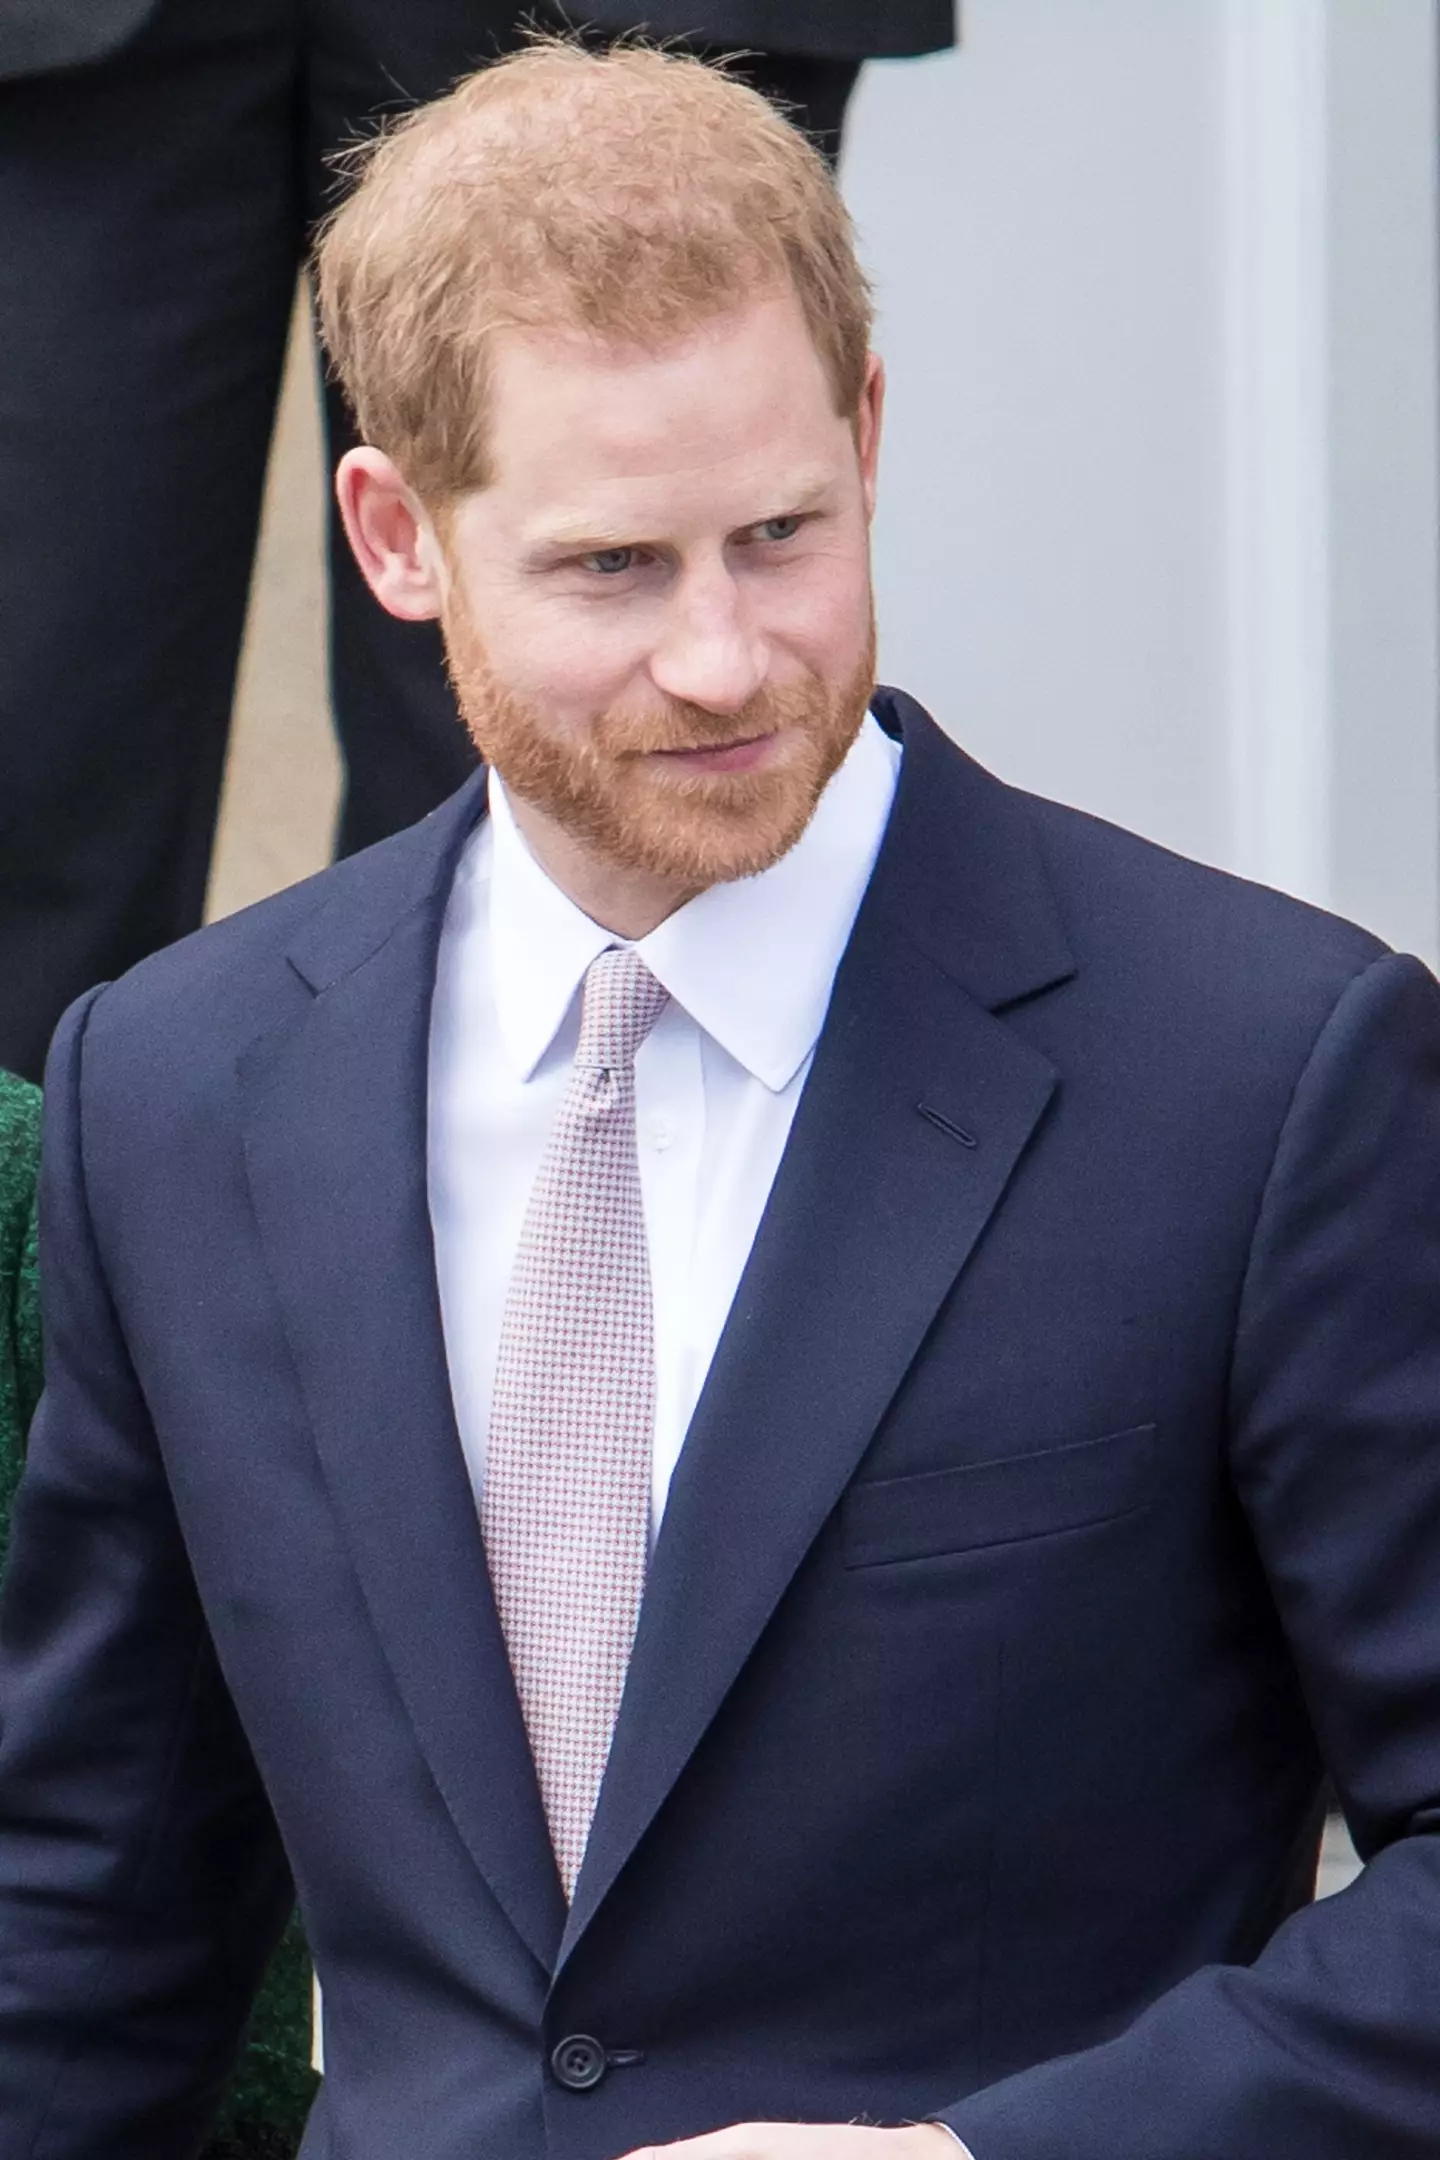 The Duke of Sussex's actual name is Henry.